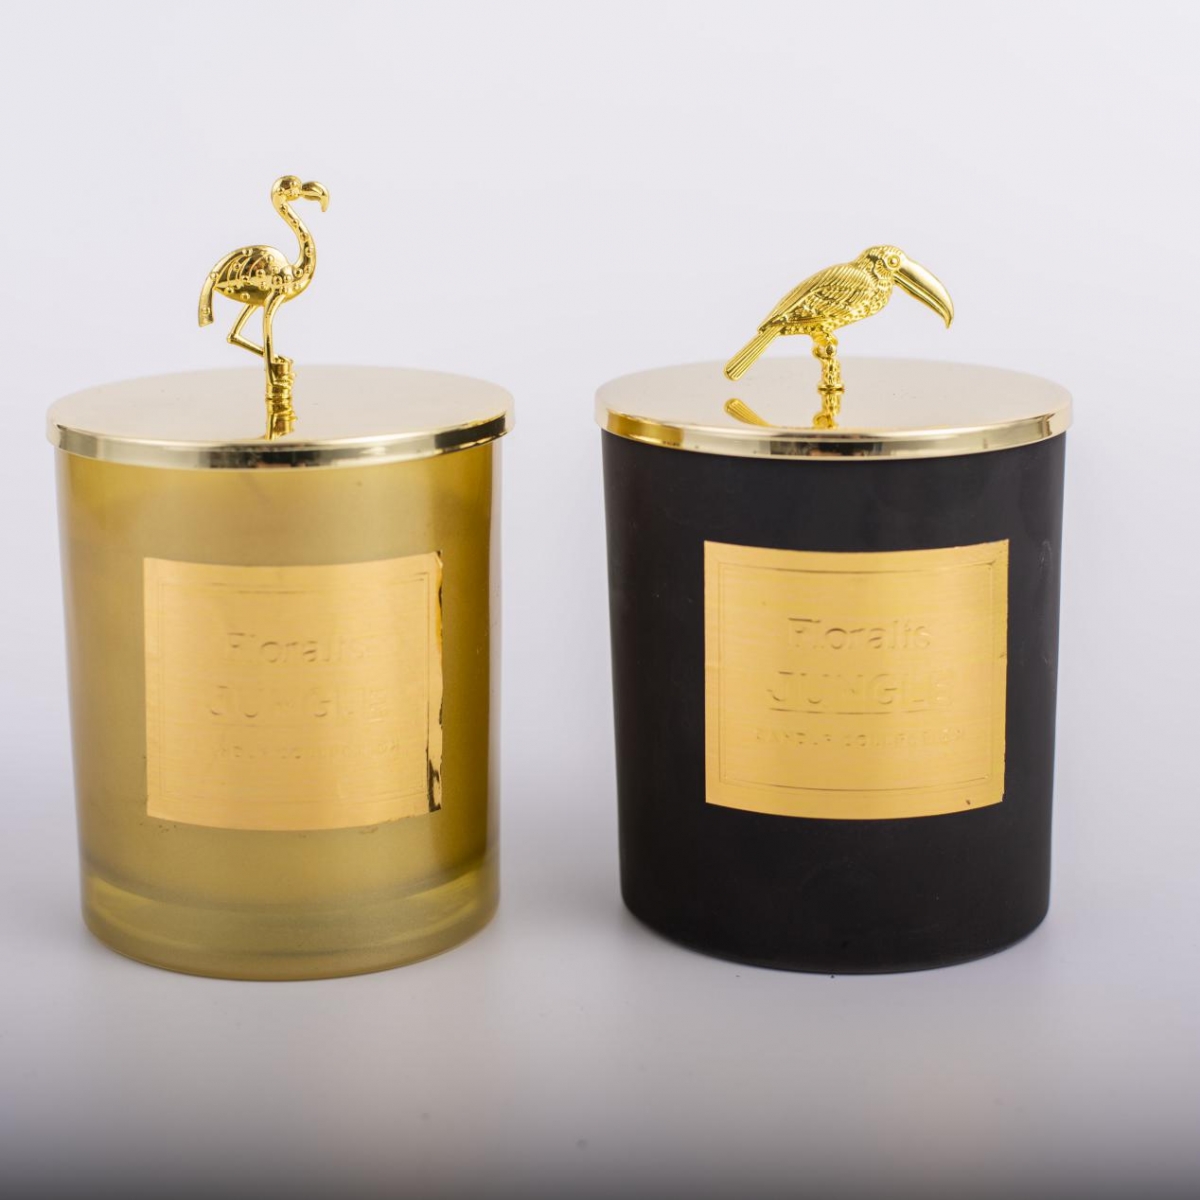 Luxury Candles-Best Soy Wax ,Natural Essential Oils ,Scented Candles In Glass Jar ,Gold Flamingo Metal Lid ,Aromatherapy ,China Factory ,Price-HOWCANDLE-Candles,Scented Candles,Aromatherapy Candles,Soy Candles,Vegan Candles,Jar Candles,Pillar Candles,Candle Gift Sets,Essential Oils,Reed Diffuser,Candle Holder,